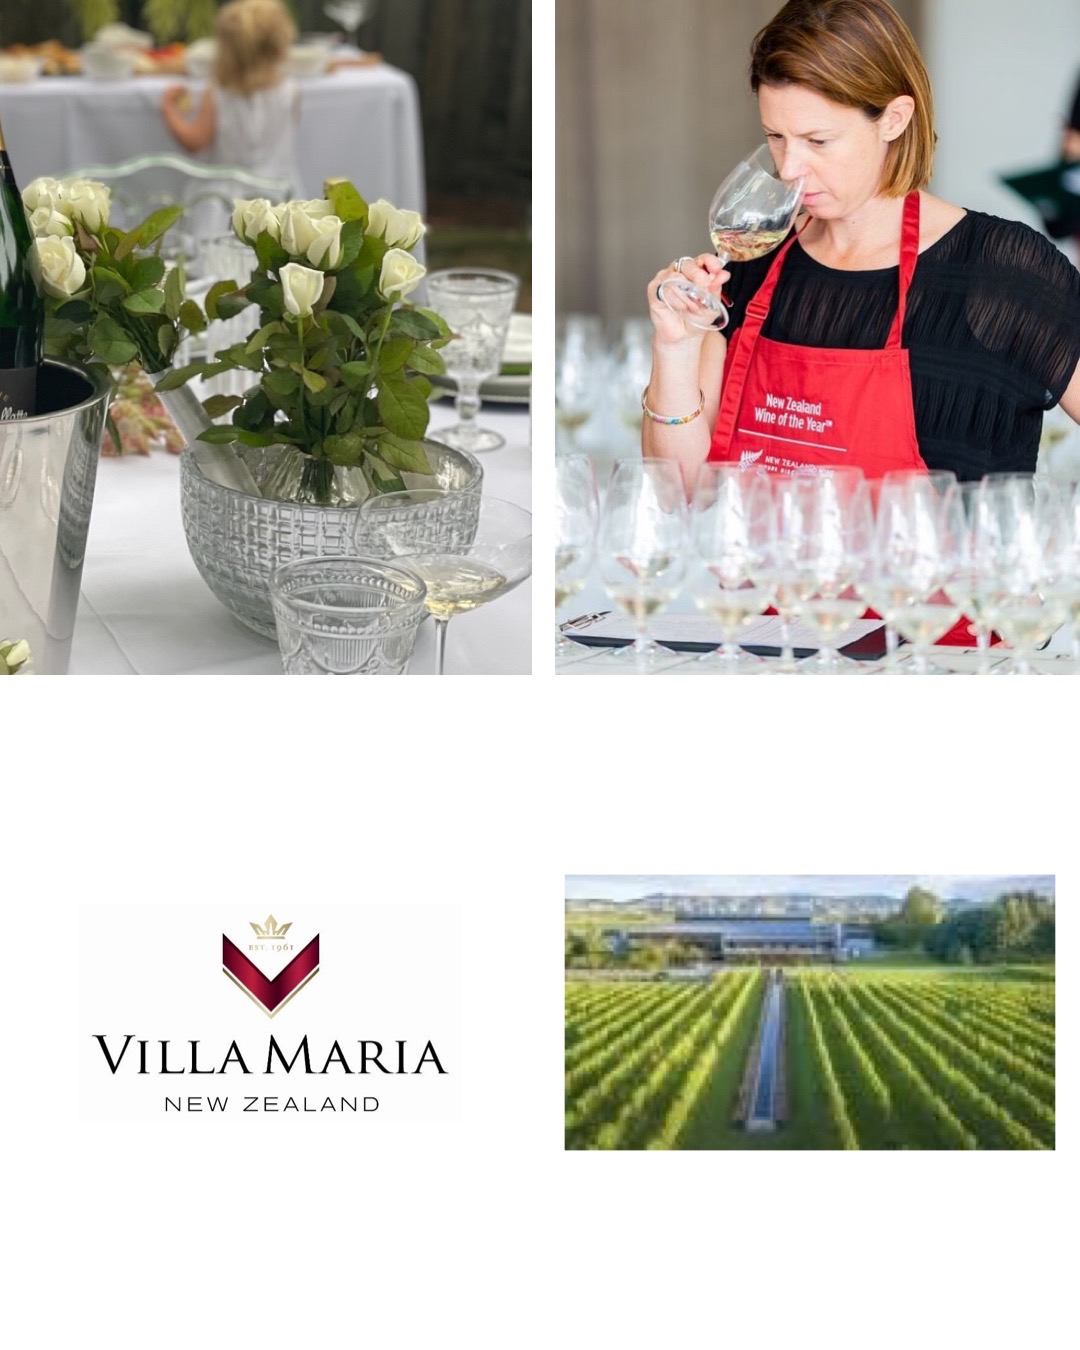 Les Dames d’Escoffier Ontario’s 1st “Annual White Party” with Helen Morrison, Senior Winemaker, Villa Maria Wines NZ – July 21st [Toronto Event]